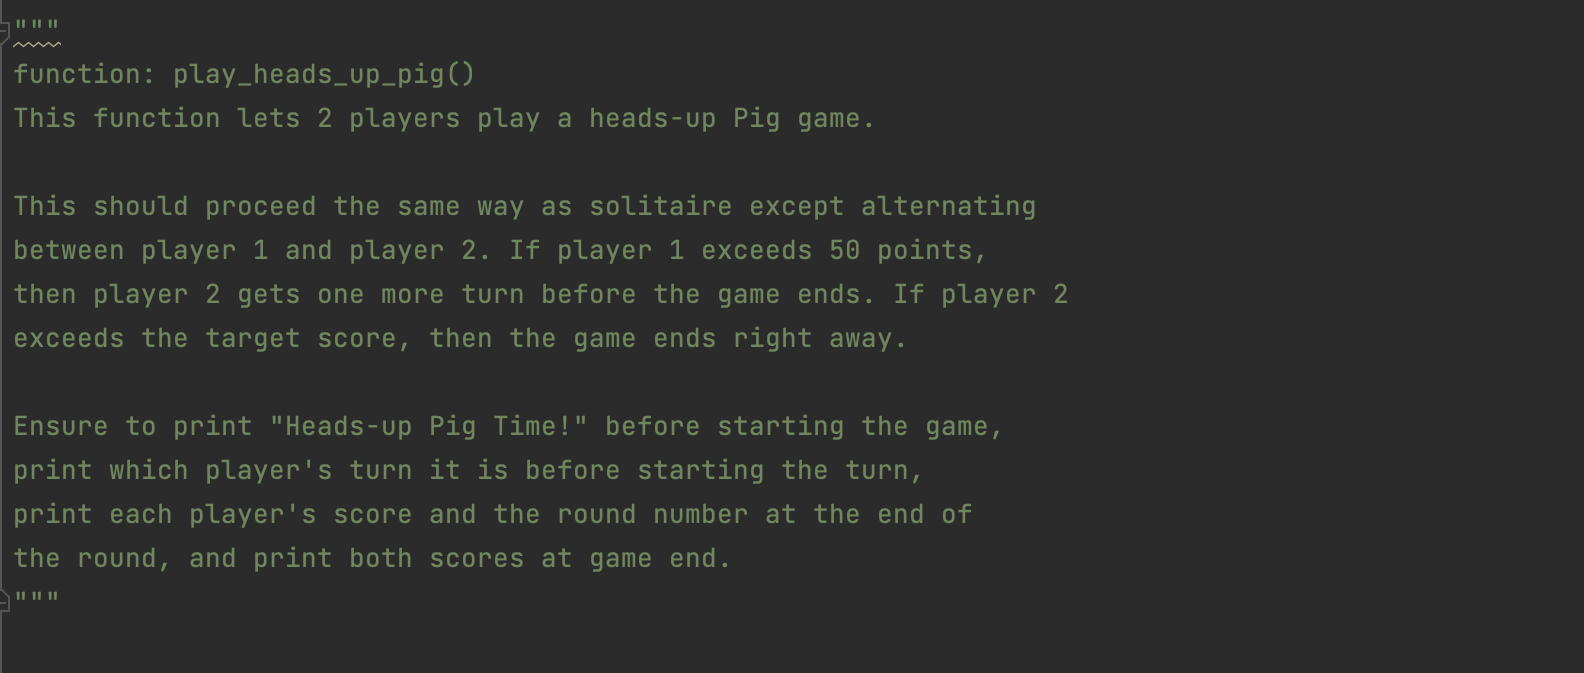 || || || function: play_heads_up_pig() This function lets 2 players play a heads-up Pig game. This should